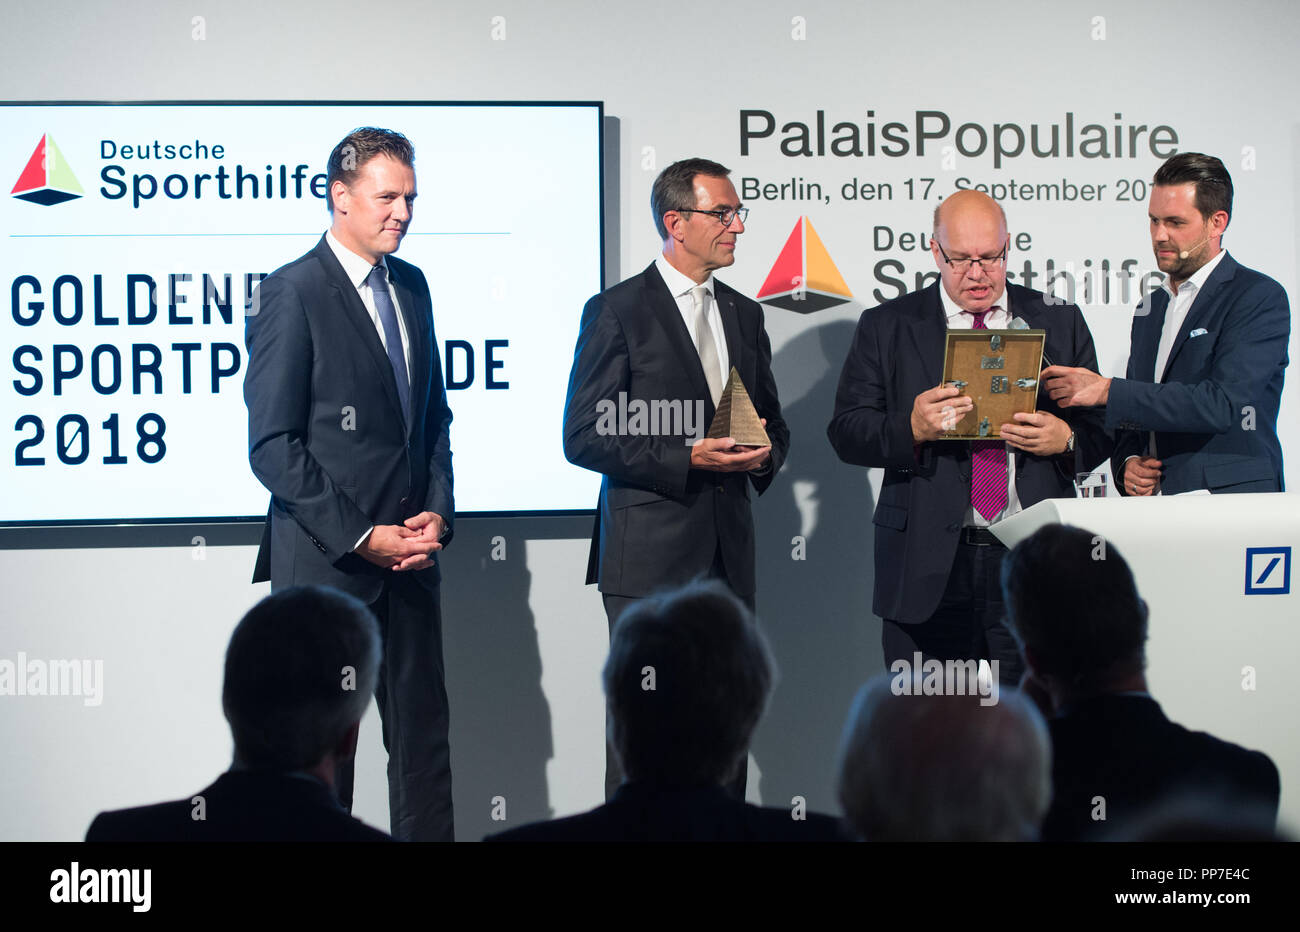 Frank KOCH (CEO Georgsmarienhuette Group) and laudator Peter ALTMEIER (Federal Minister for Economic Affairs and Energy) hand over the sports pyramid to Prof. Dr. med. Klaus STEINBACH (swimming, prize winner 2018). re: Moderator Matthias KILLING. Awarding of the Golden Sports Pyramid and awarding of the Sports Fellowship 2018 at the Deutsche Bank's PalaisPopulaire in Berlin, Germany on 17.09.2018. | Usage worldwide Stock Photo